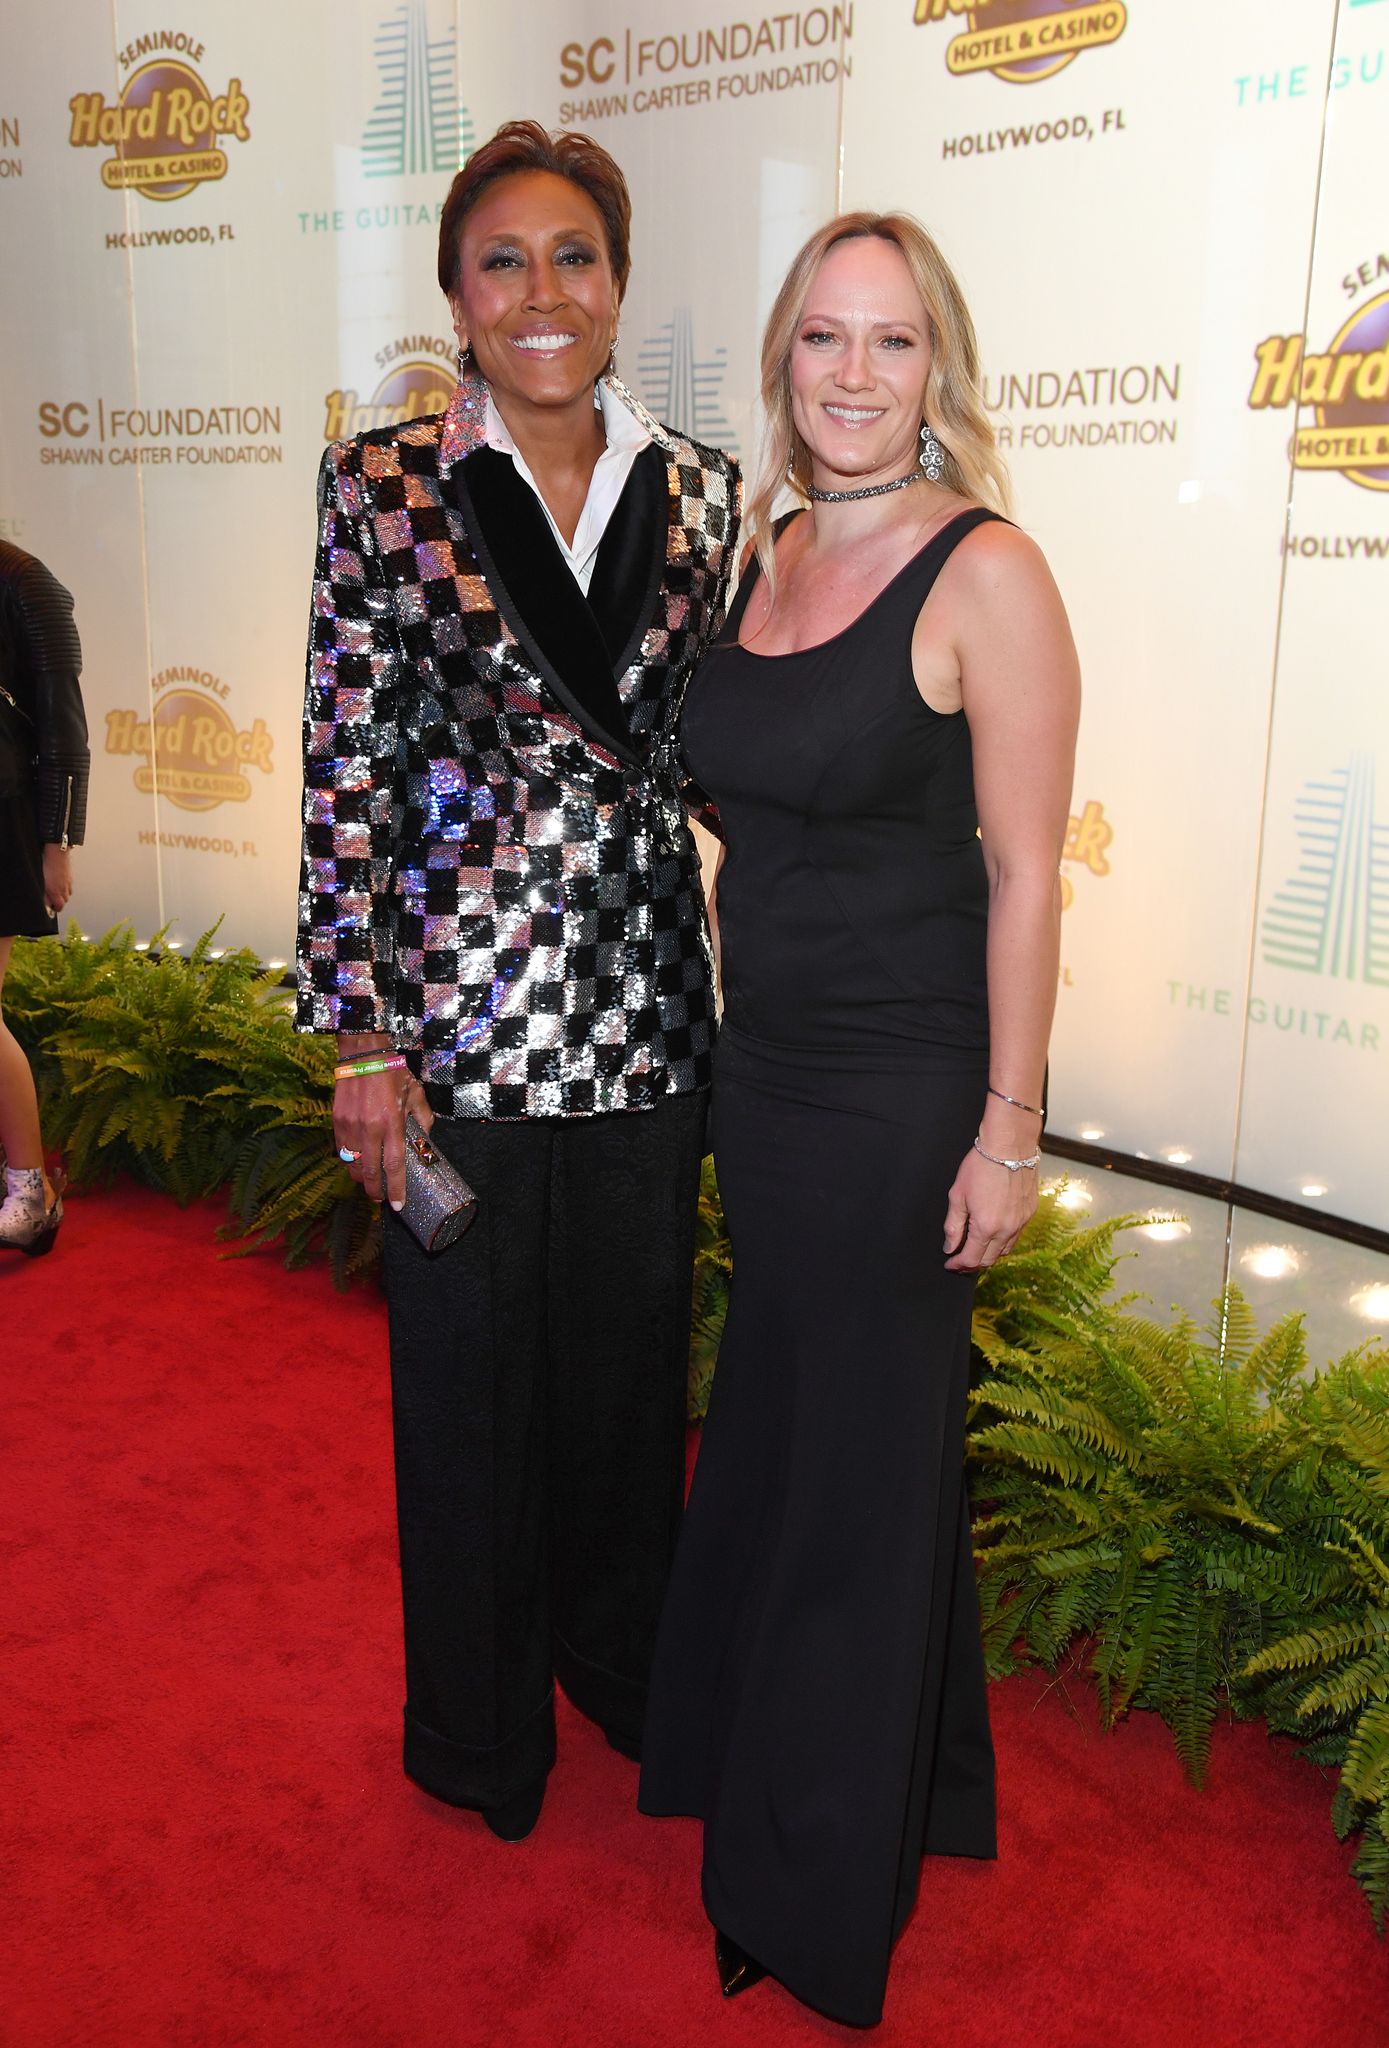 Robin Roberts and Amber Laign at the Shawn Carter Foundation Gala at the Hard Rock Hotel & Casino on November 16, 2019, in Hollywood, Florida. | Source: Getty Images